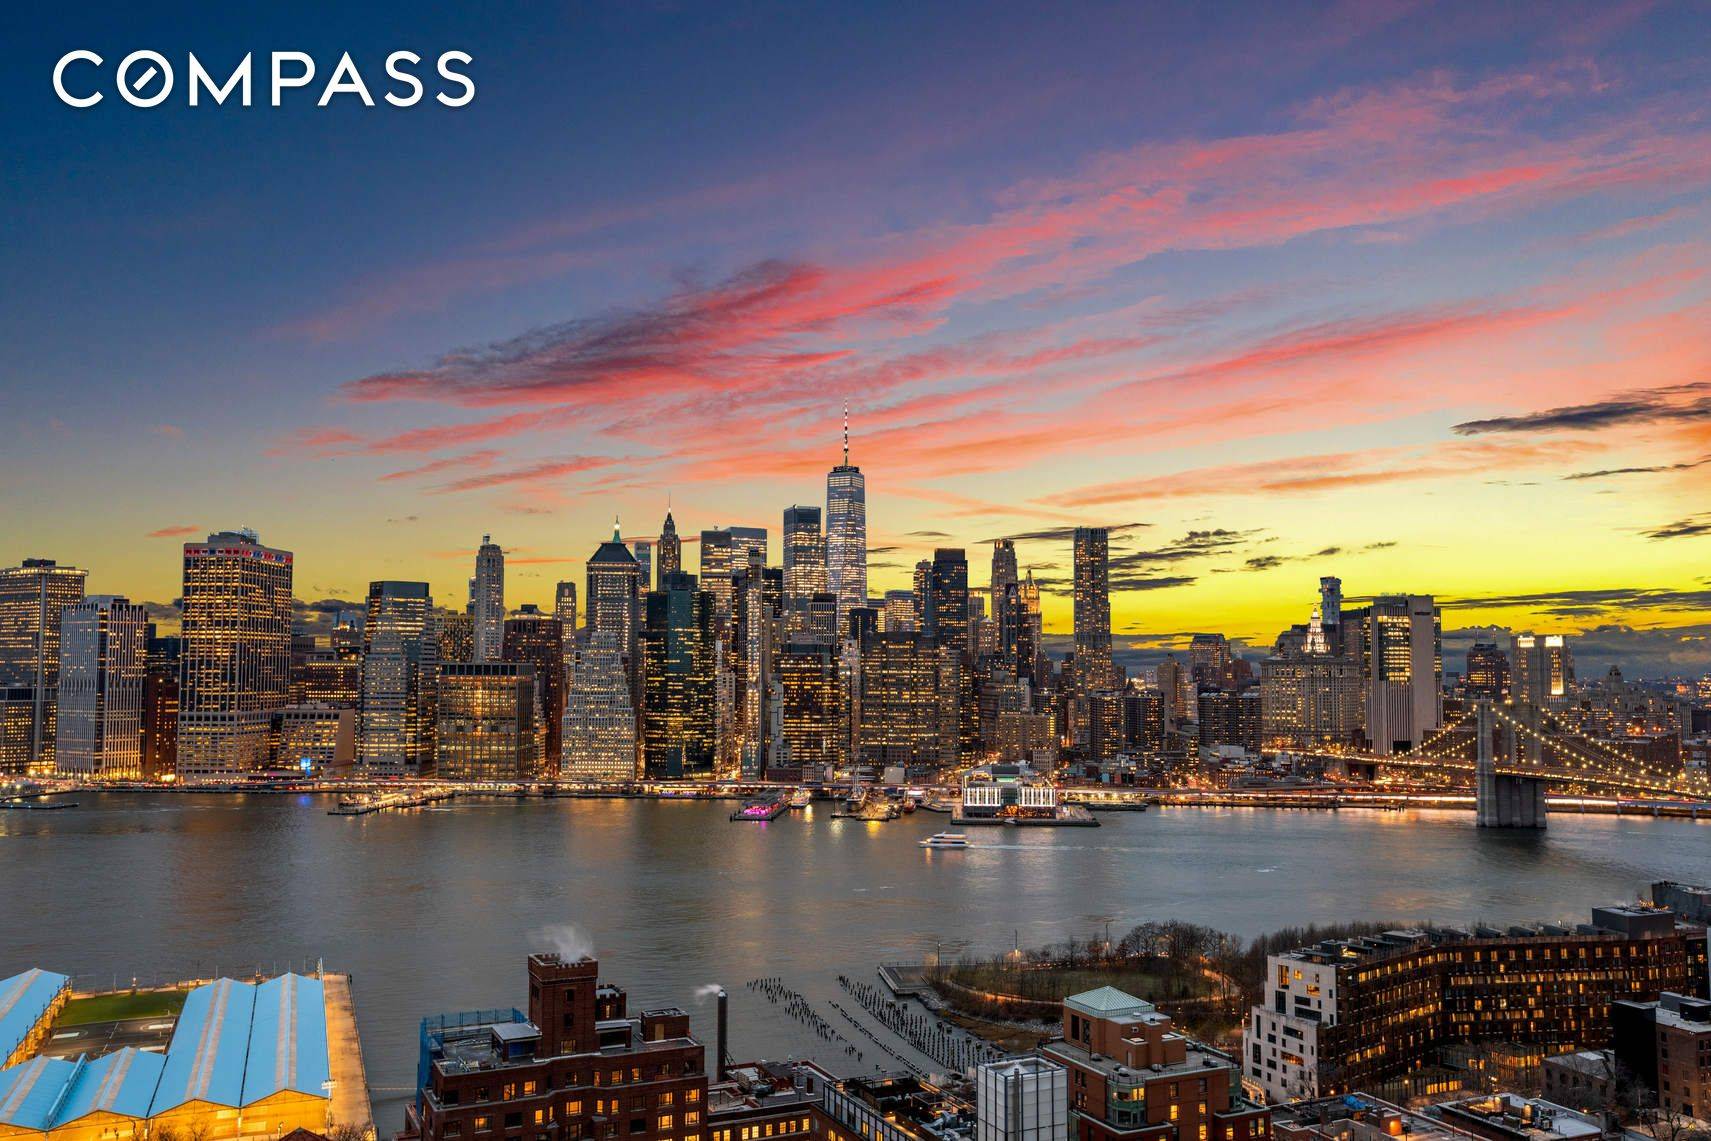 Stunning, jaw dropping and unobstructed views of the NY Harbor, Statue of Liberty, Governors Island, Downtown Manhattan, and the Brooklyn Bridge from every window !